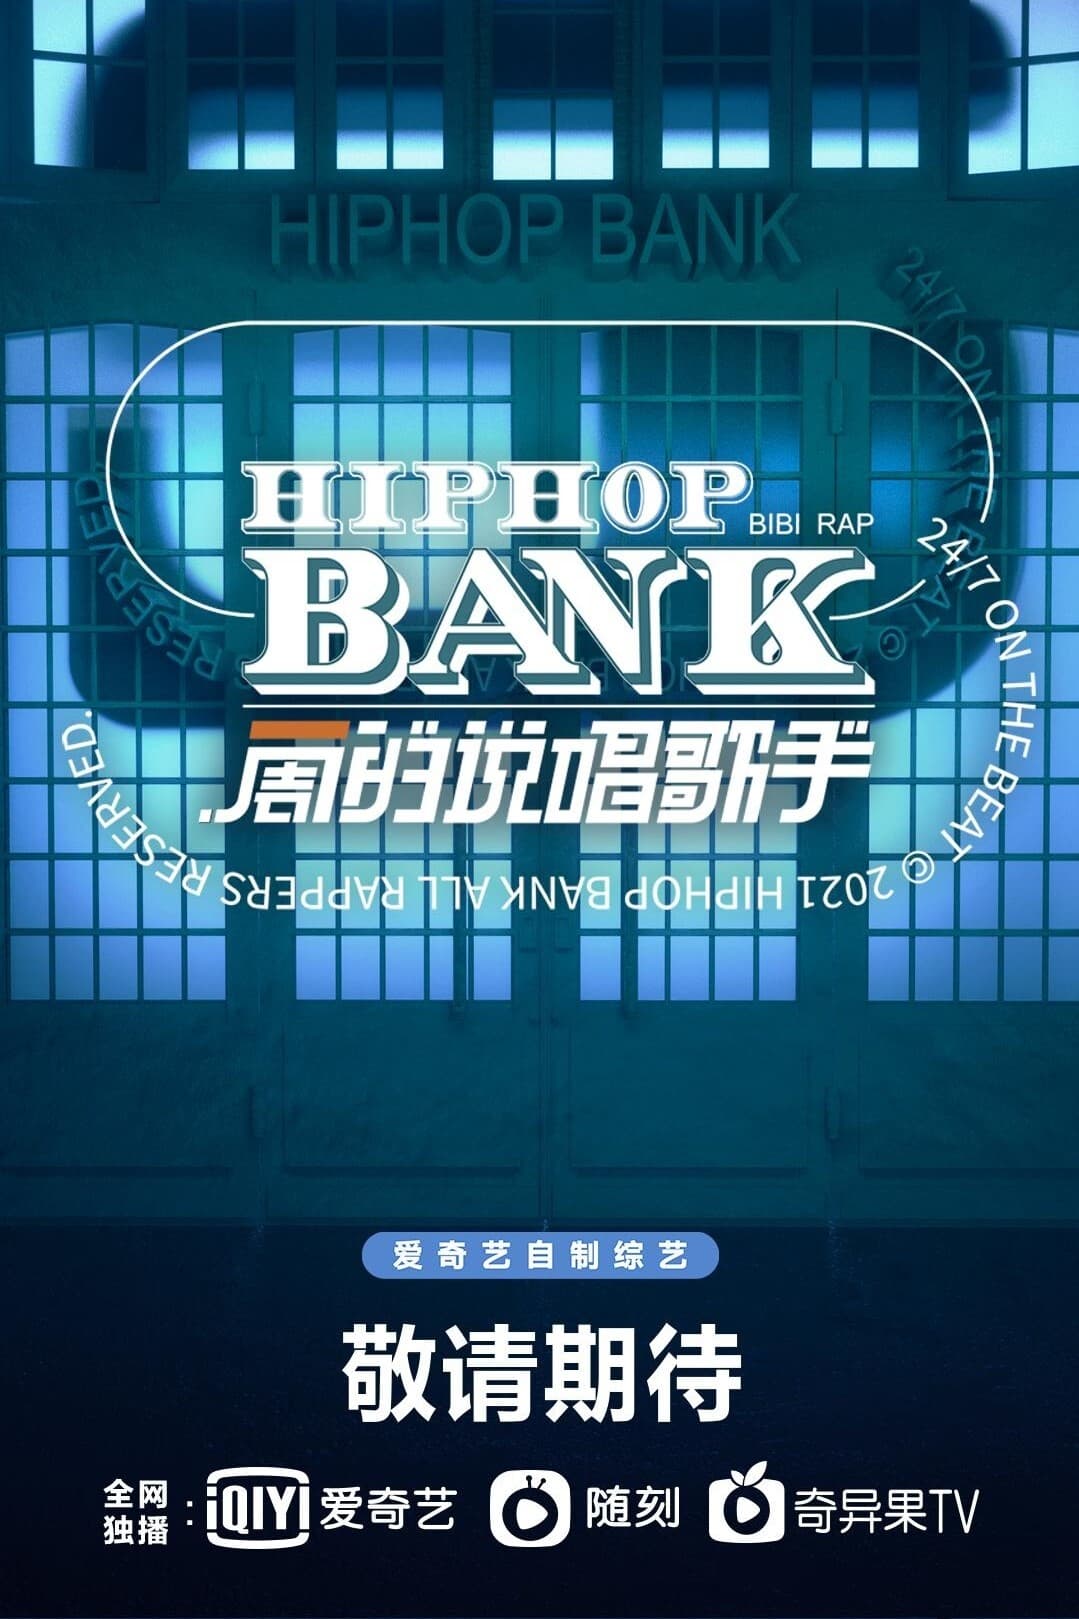 TV ratings for HipHop Bank (一周的说唱歌手) in Spain. iqiyi TV series